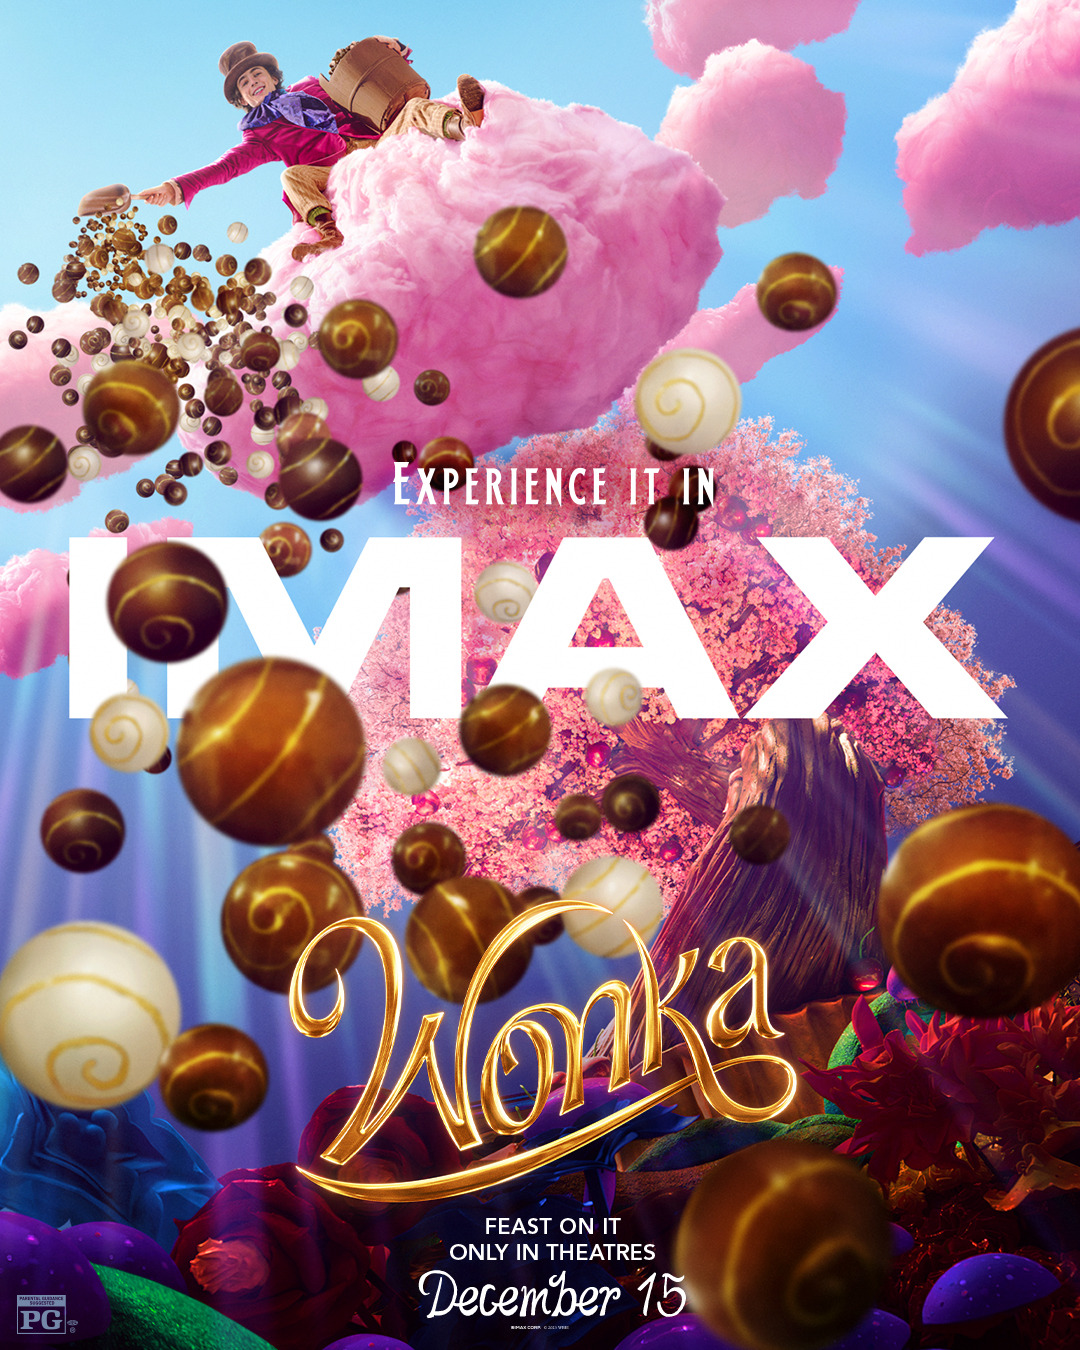 Extra Large Movie Poster Image for Wonka (#20 of 22)